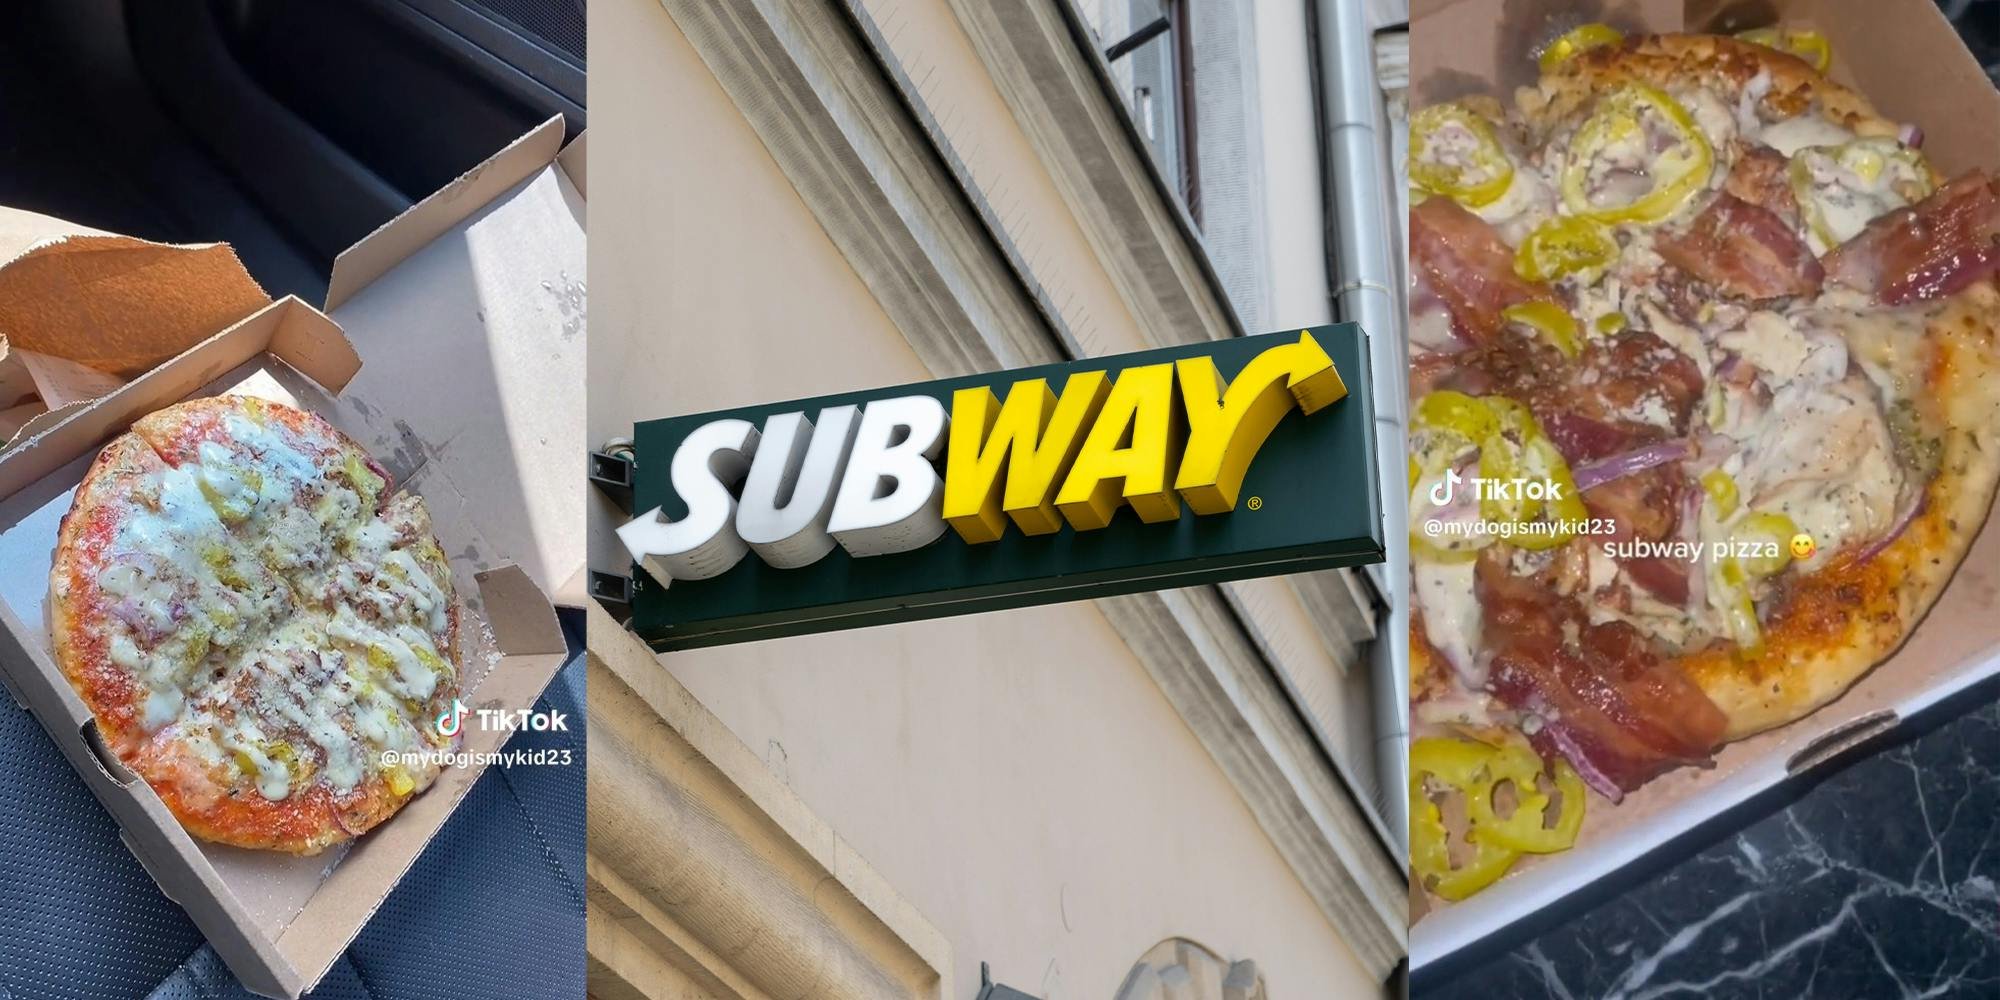 'Y’all need to go get y’all one of those': Customer praises Subway rotisserie chicken pizza hack